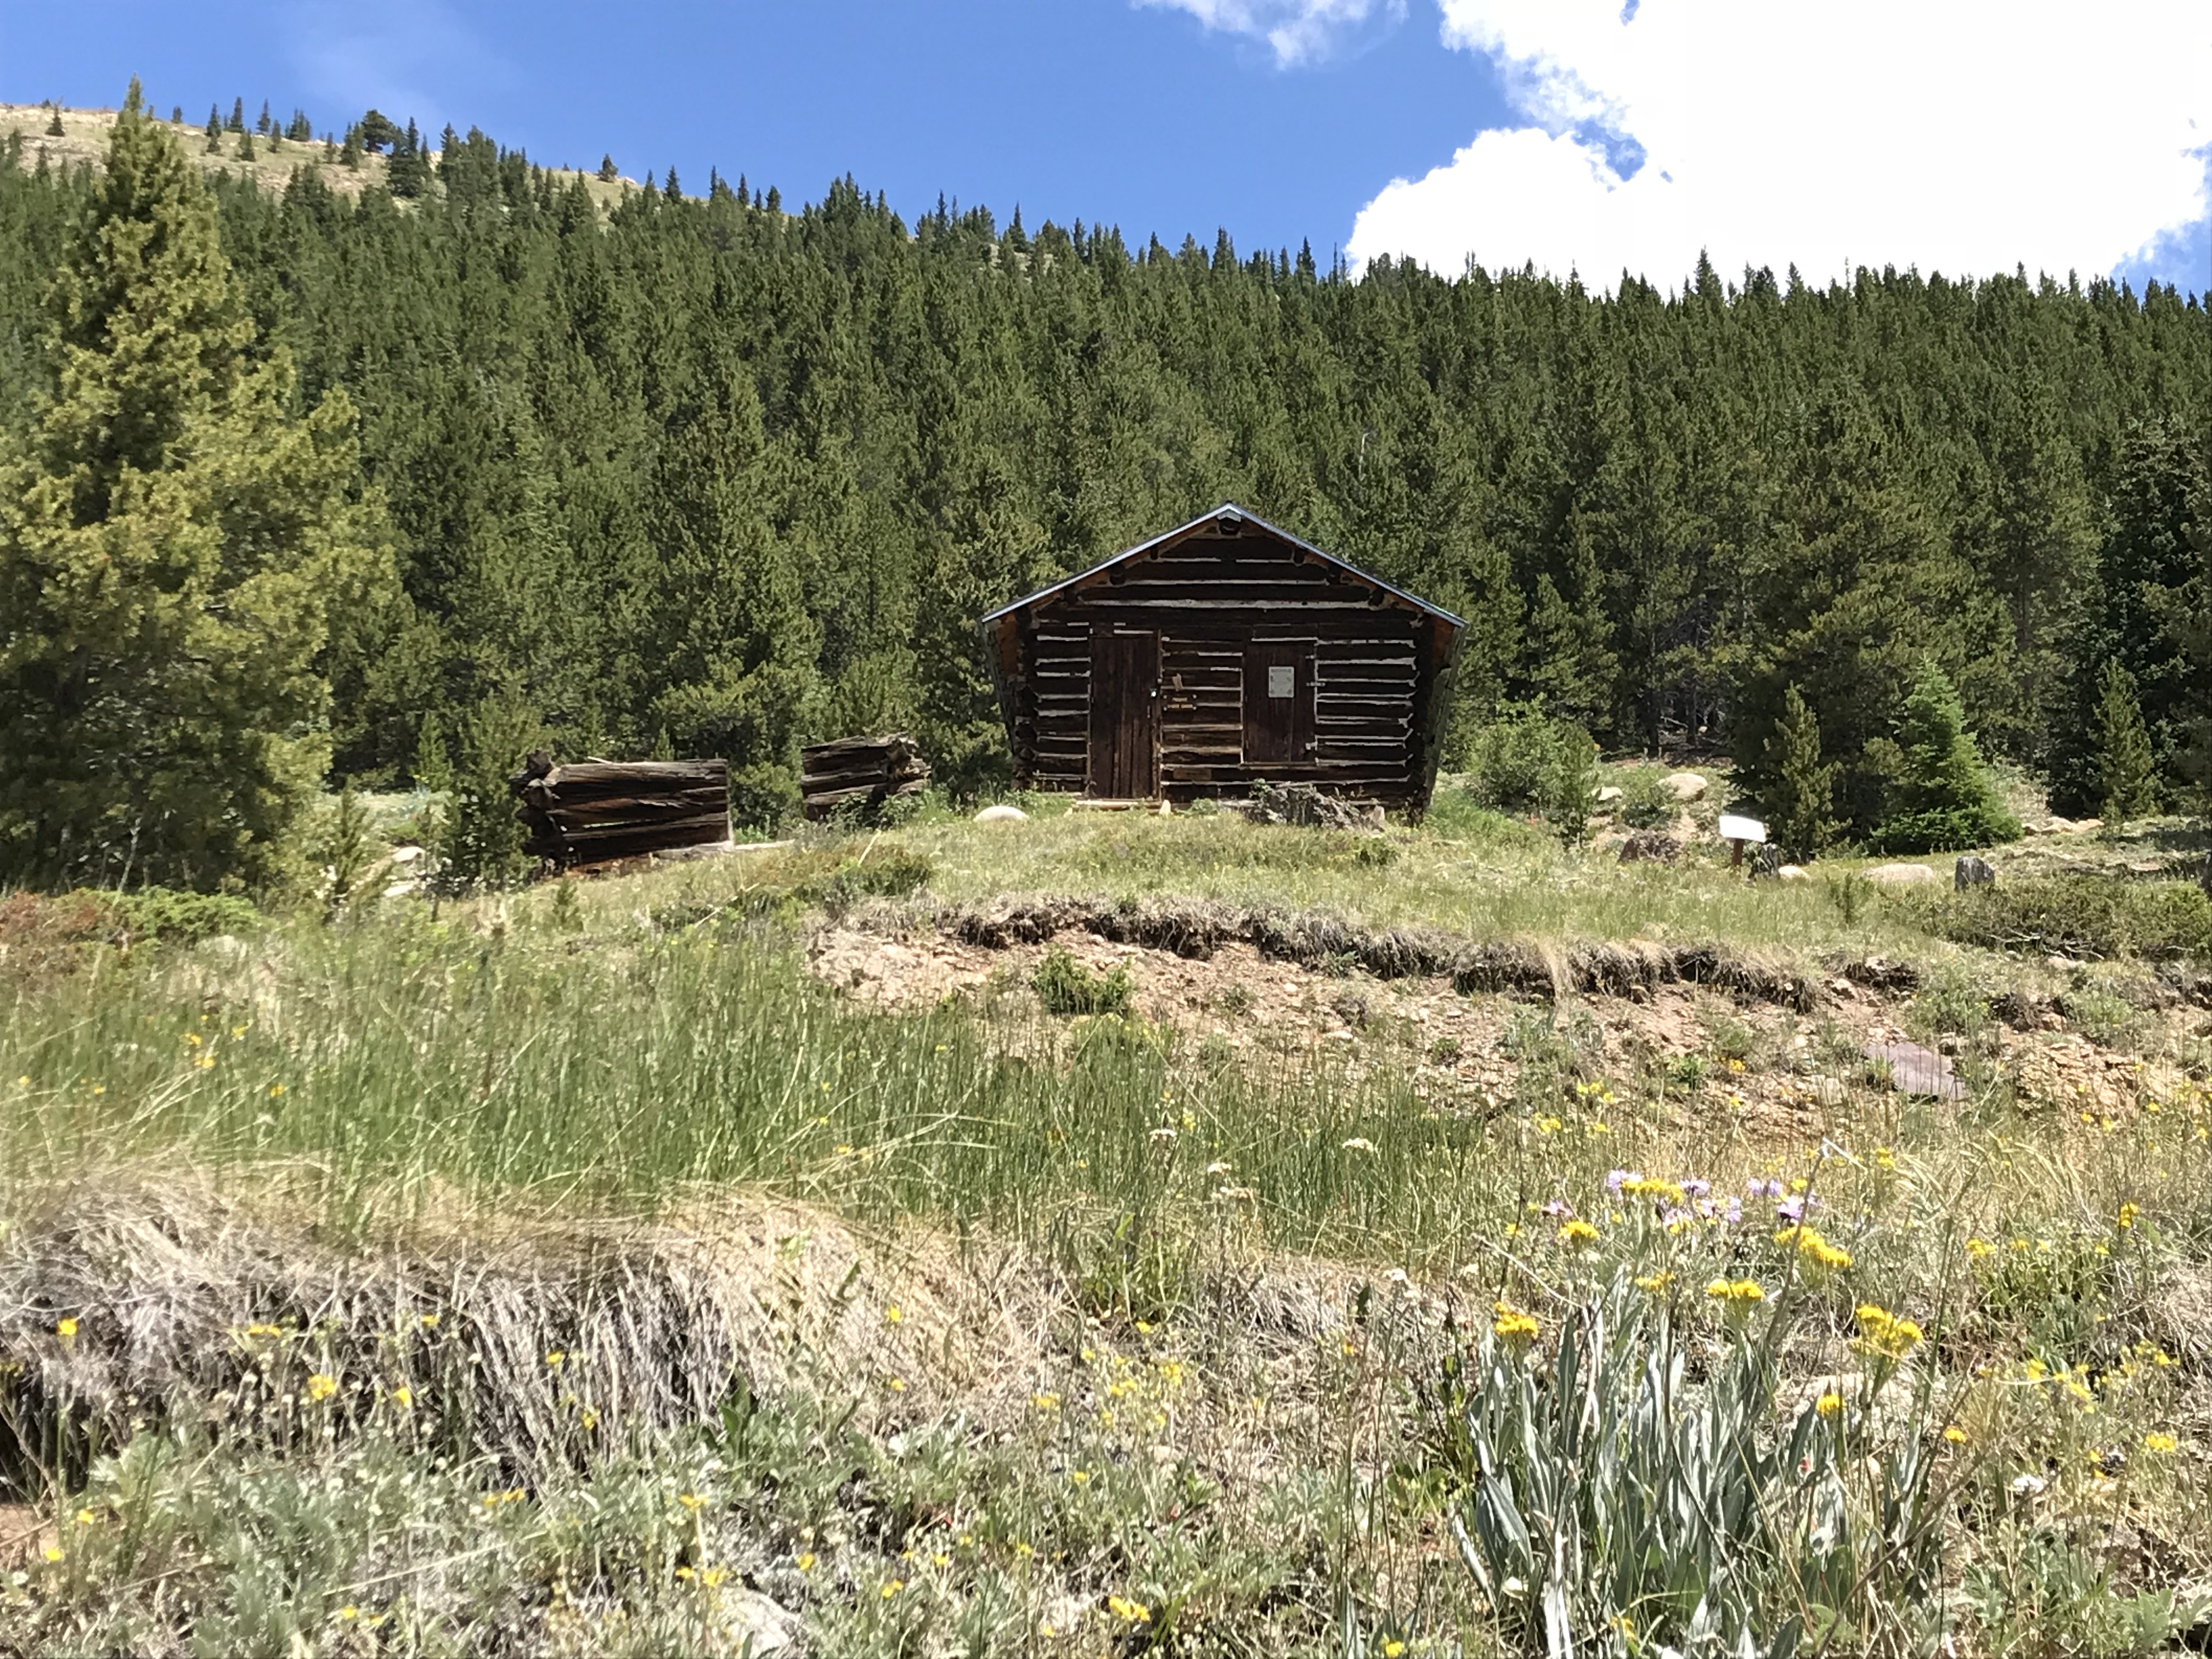 An old cabin sits in a grassy meadow with a tree-covered mountain in the background